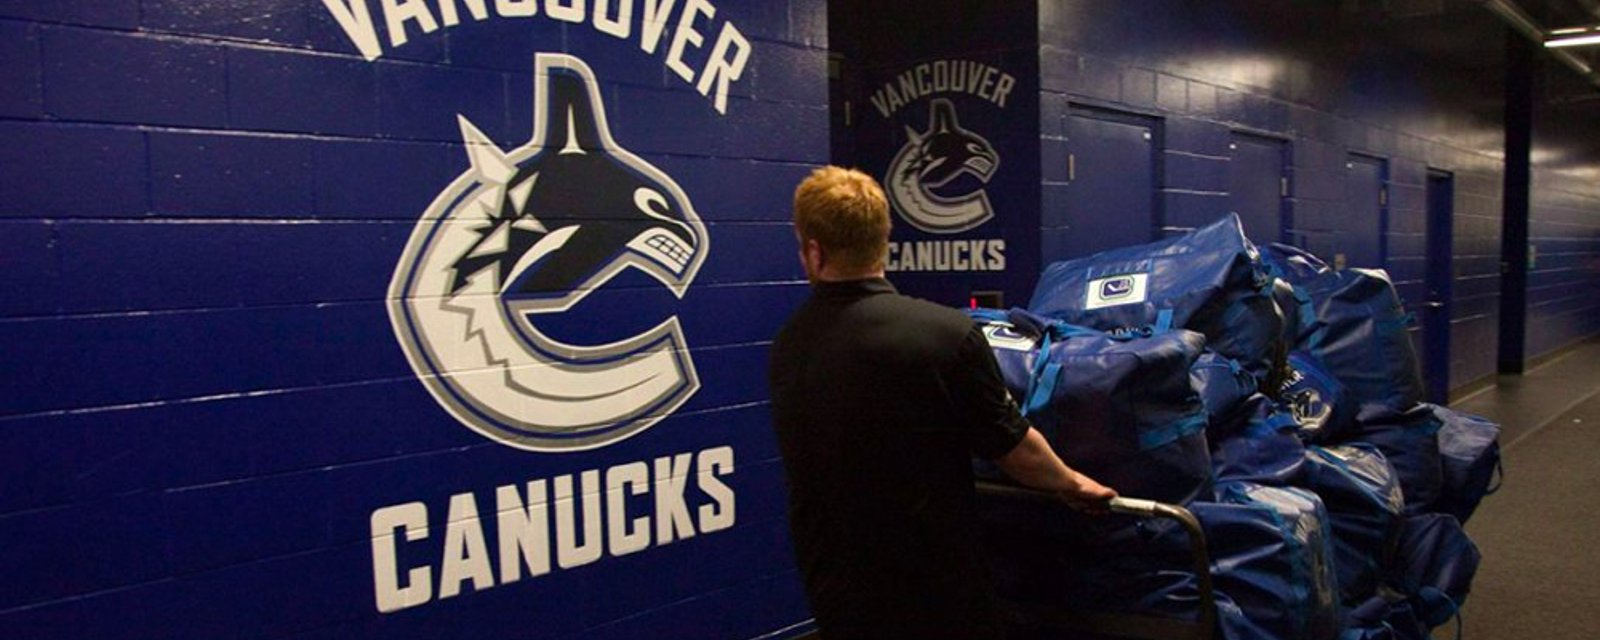 Canucks releasee an official statement concerning their players, their staff and their season